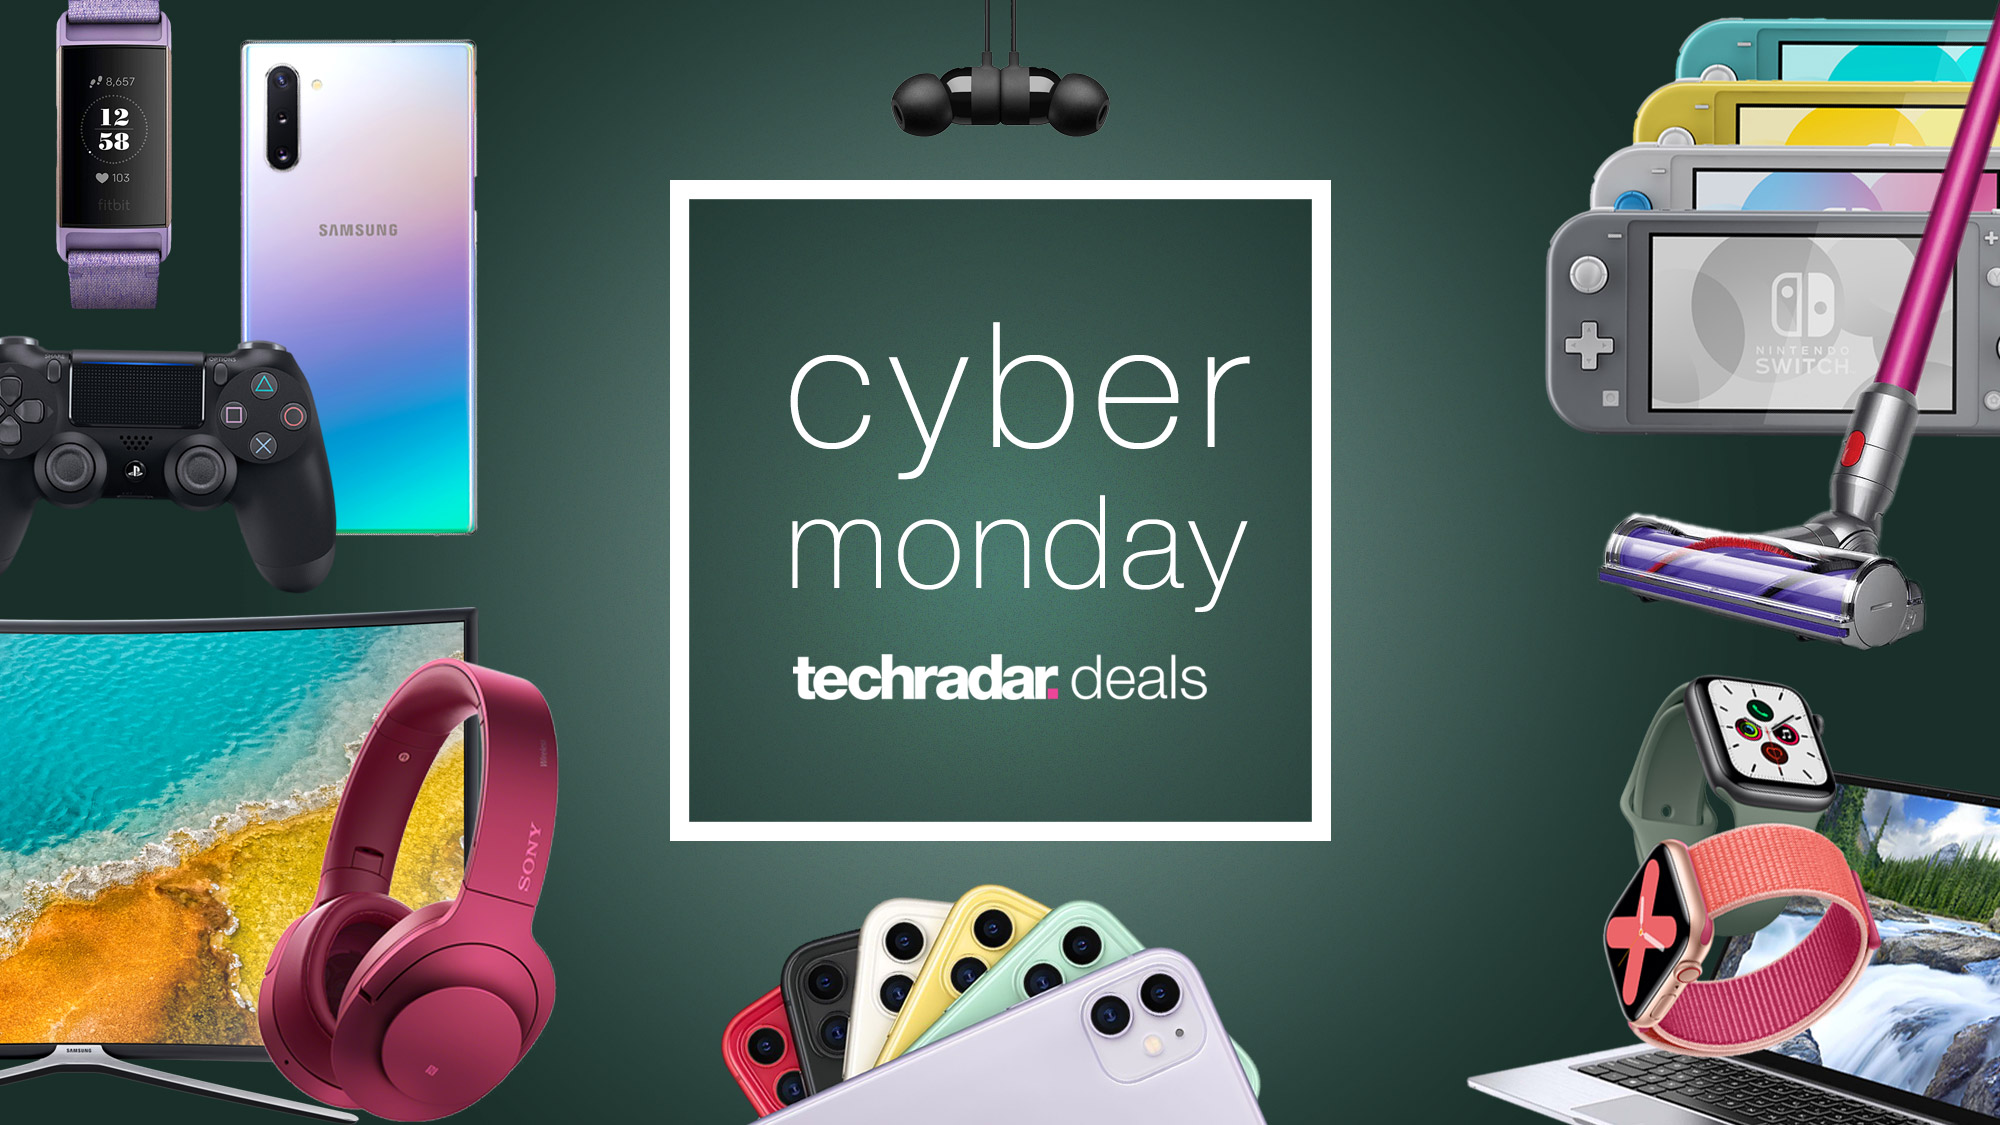 Cyber Monday Deals 2020 The Date And Deals To Expect On November 30 Techradar